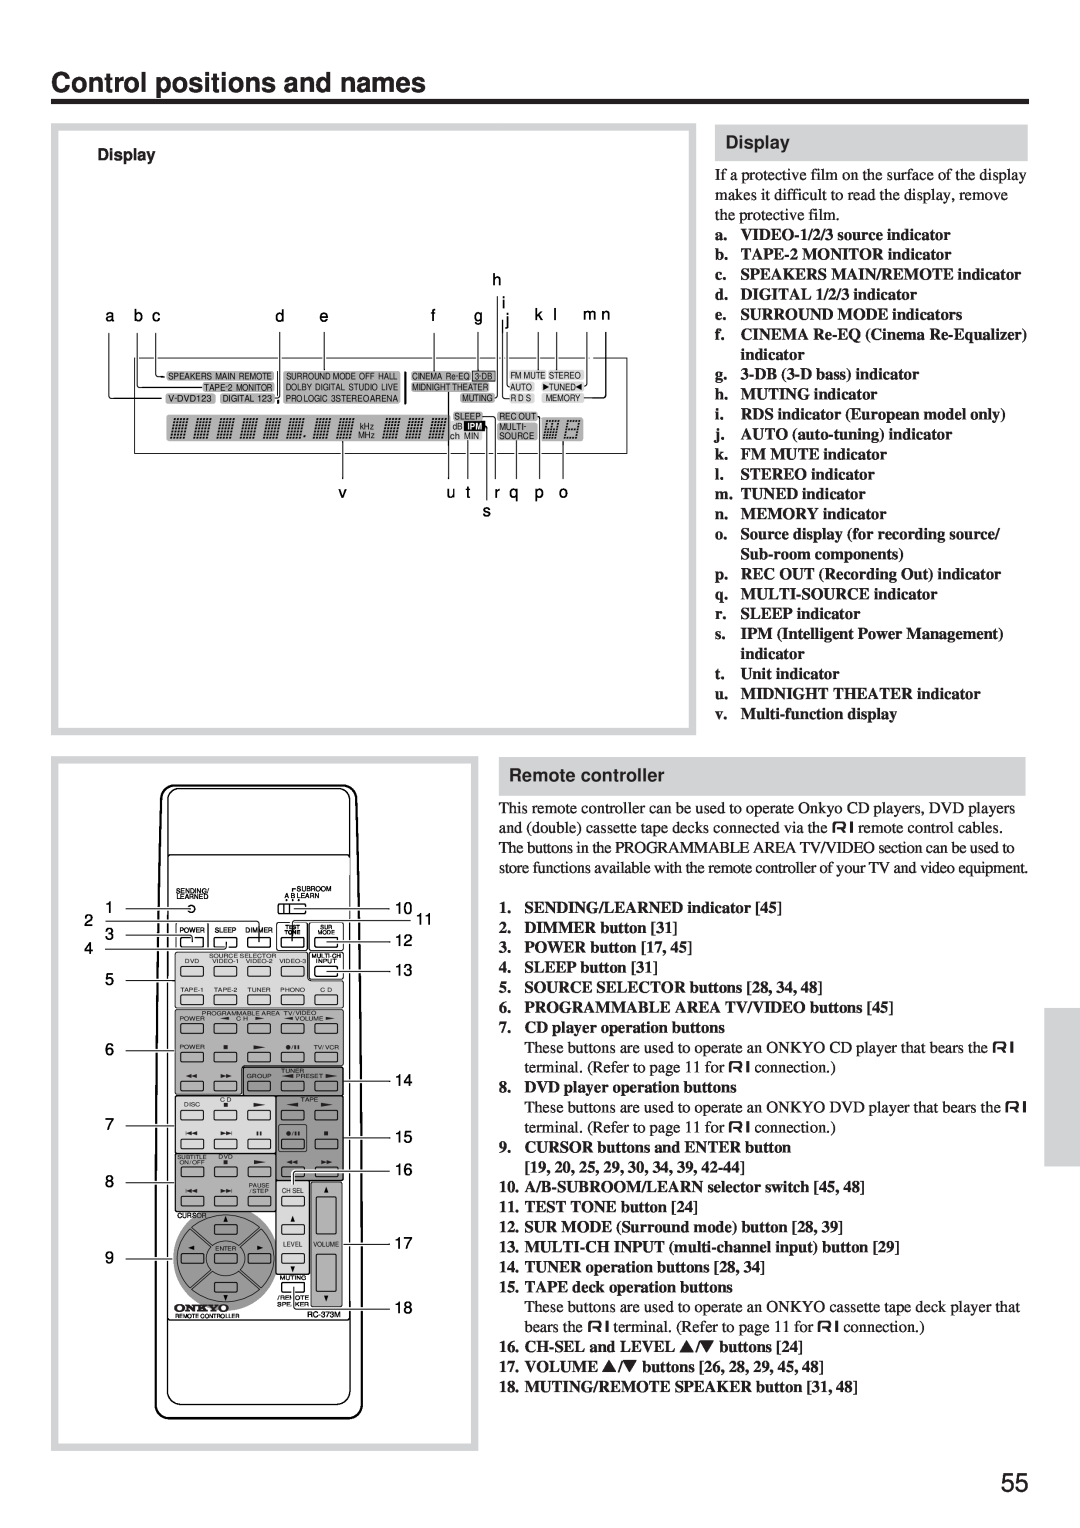 Onkyo TX-DS656 instruction manual Control positions and names, Display, Remote controller 